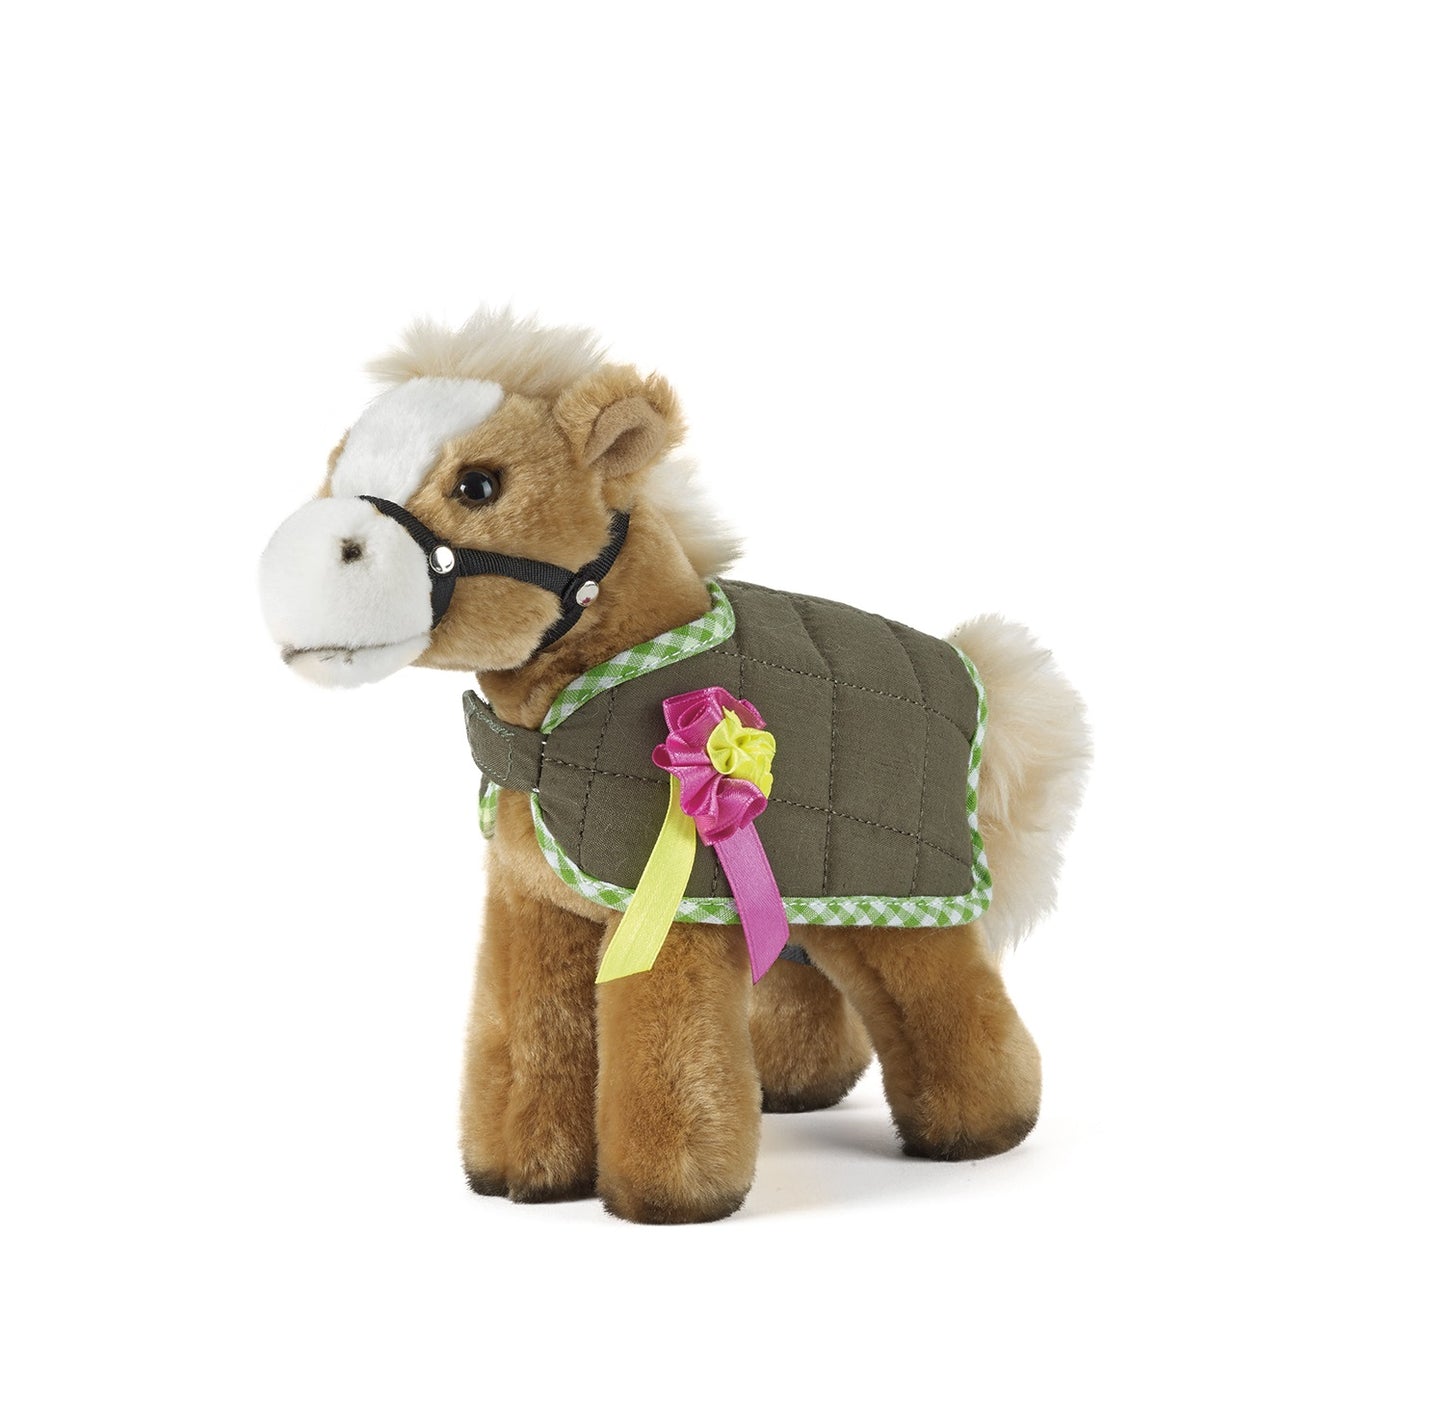 Living Nature Horse with Blanket Soft Toy